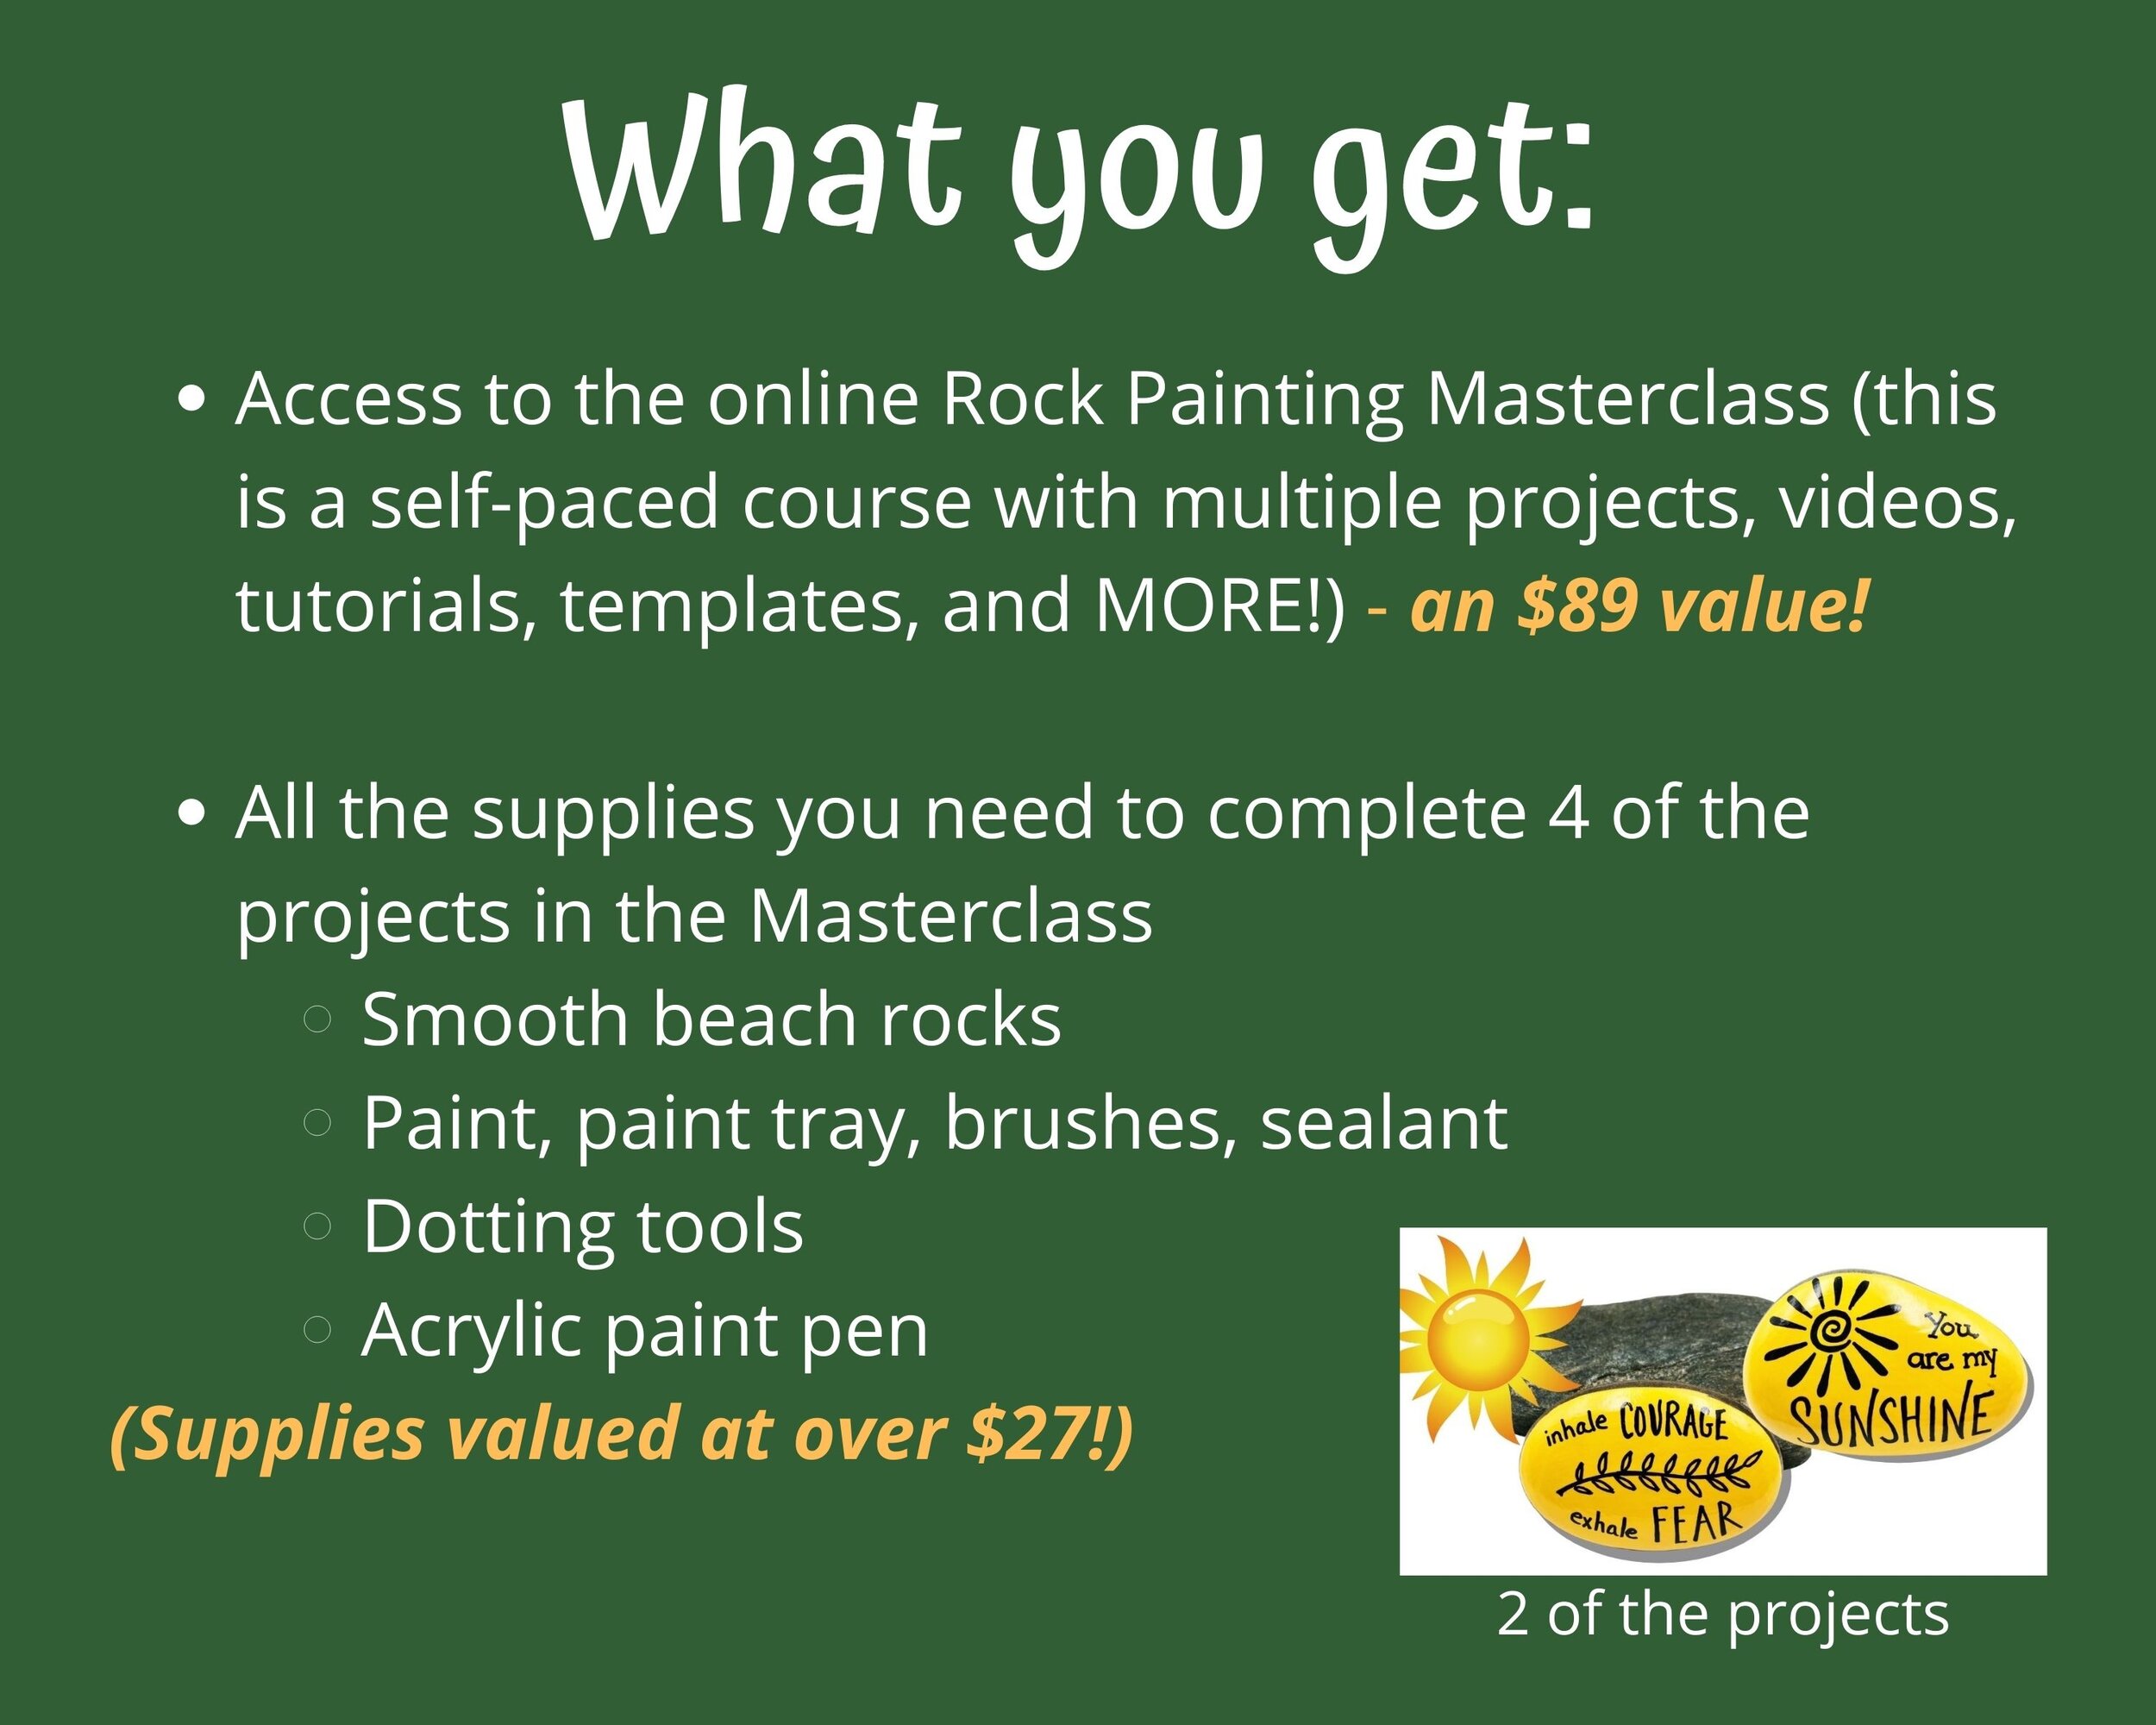 My favorite supplies for rock painting